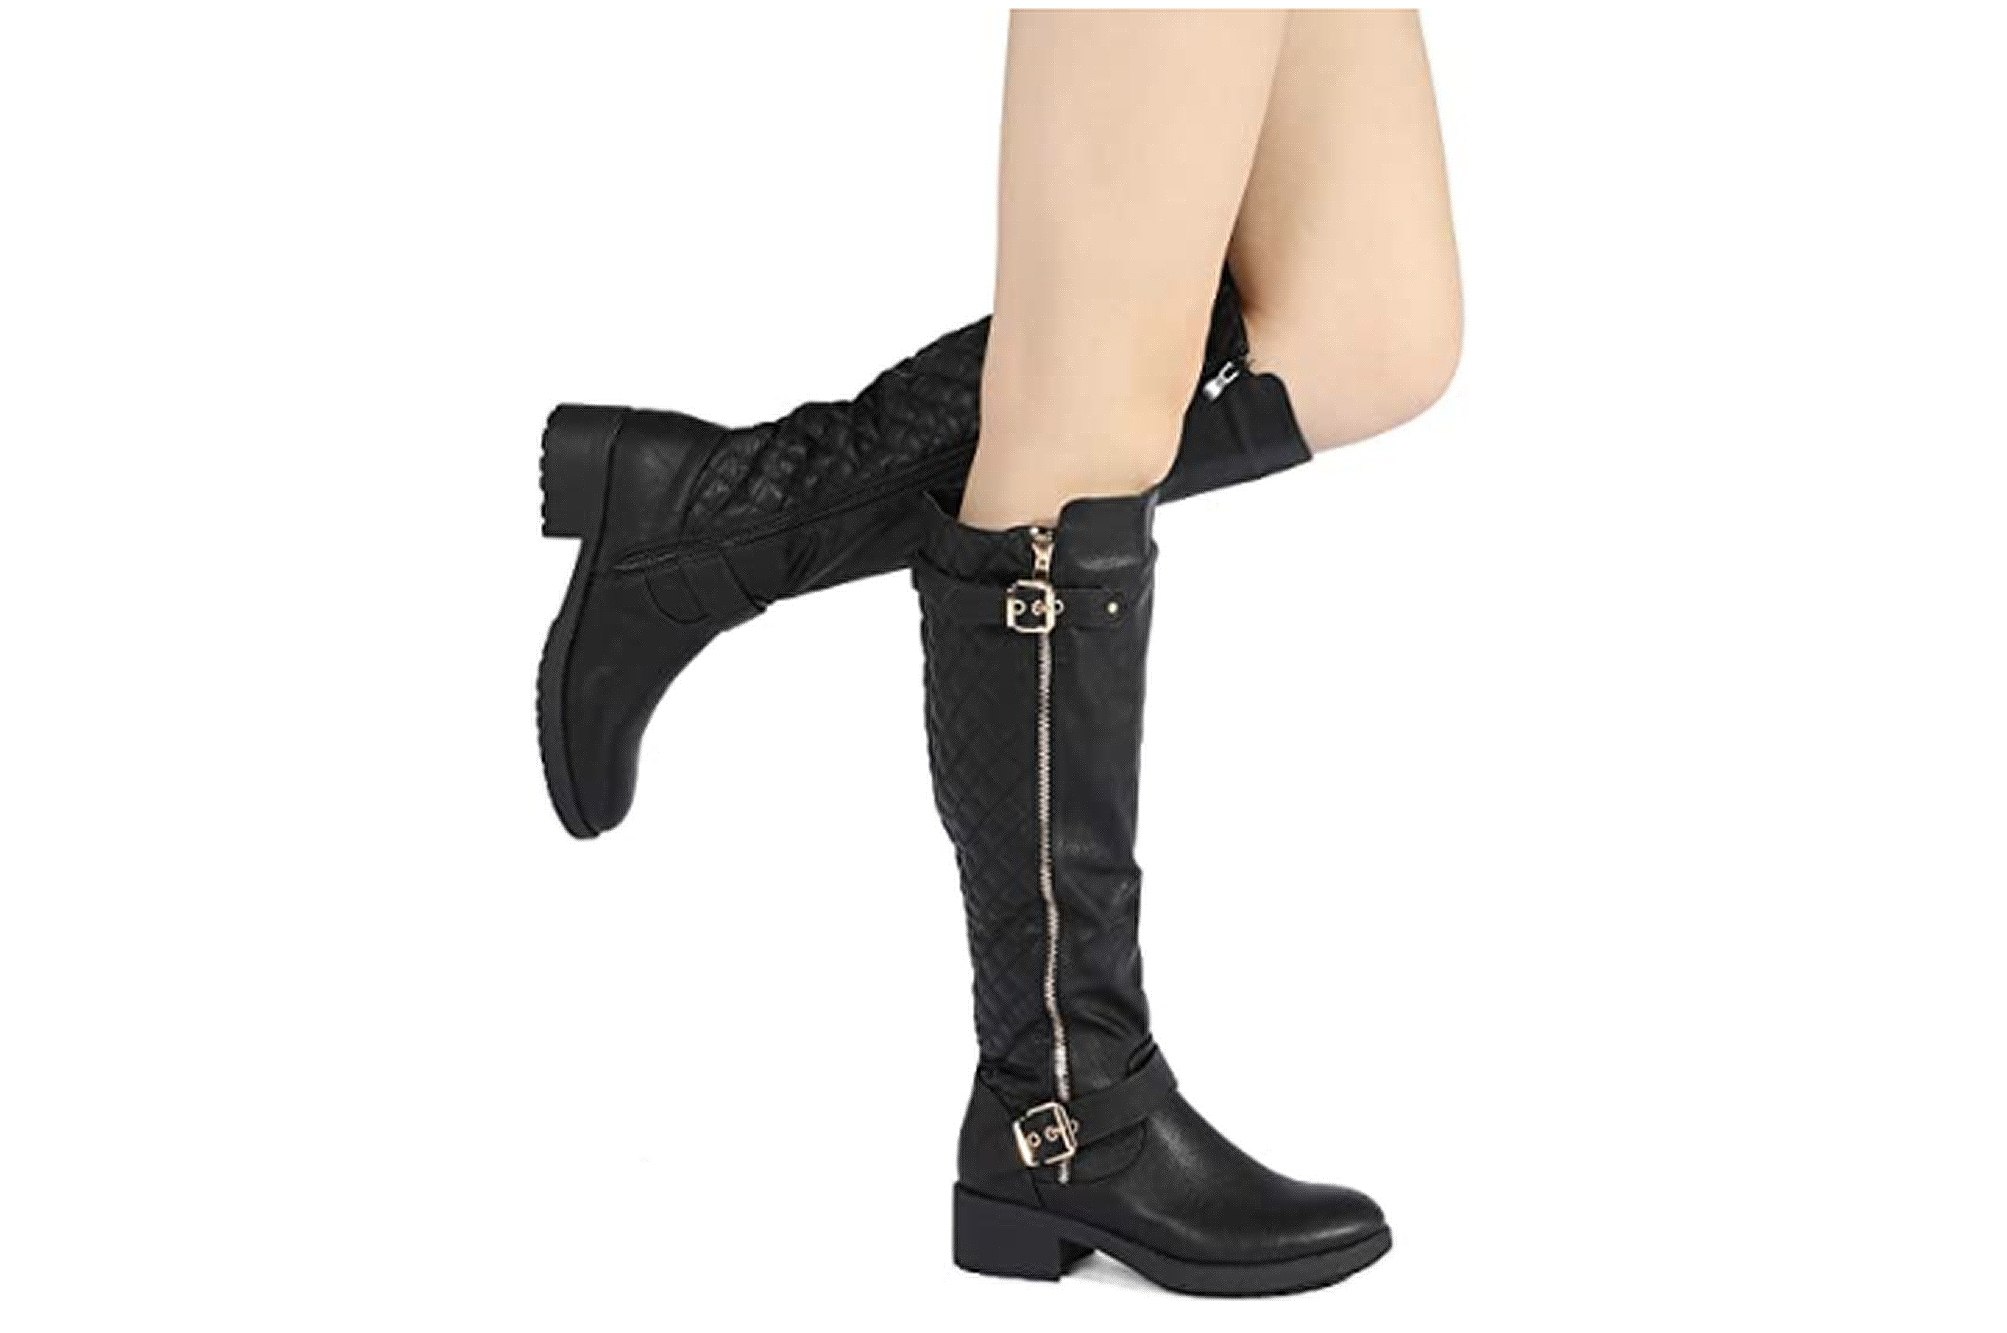 riding boots wide calf fitting